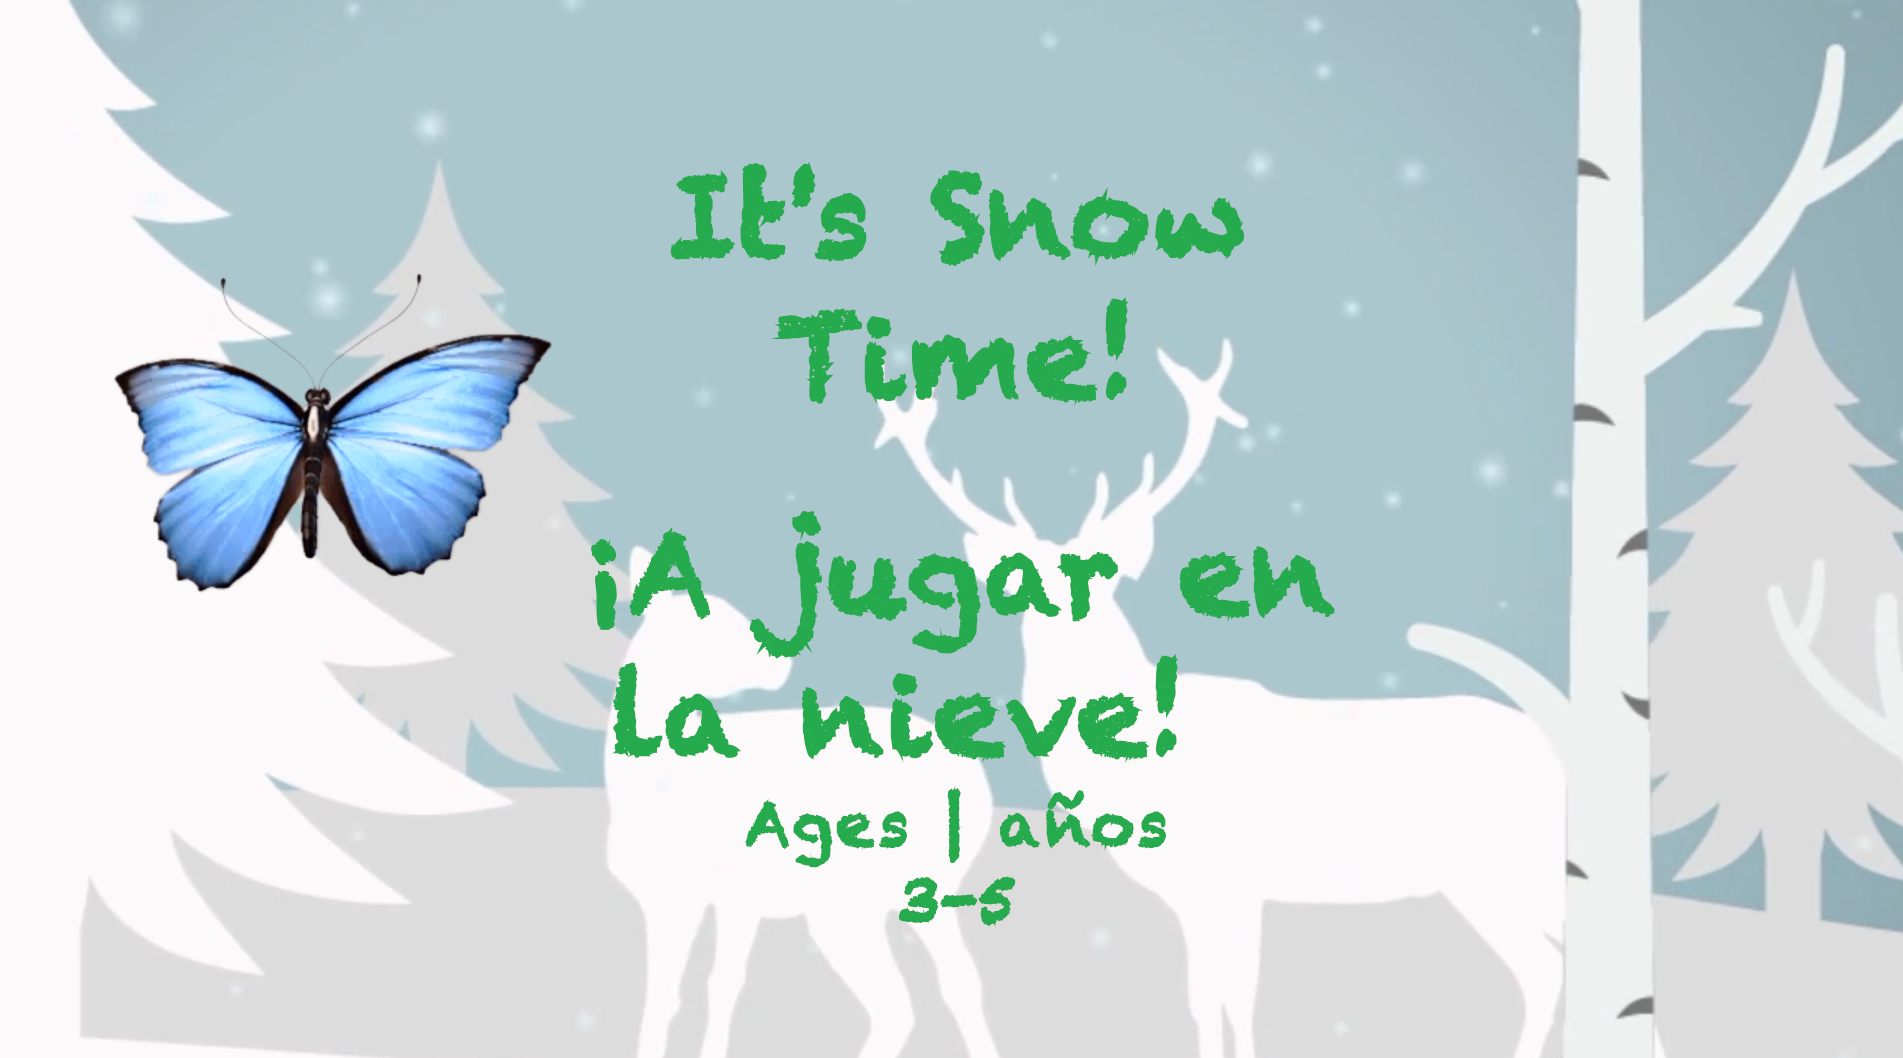 It’s Snow Time! for 3-5 year olds